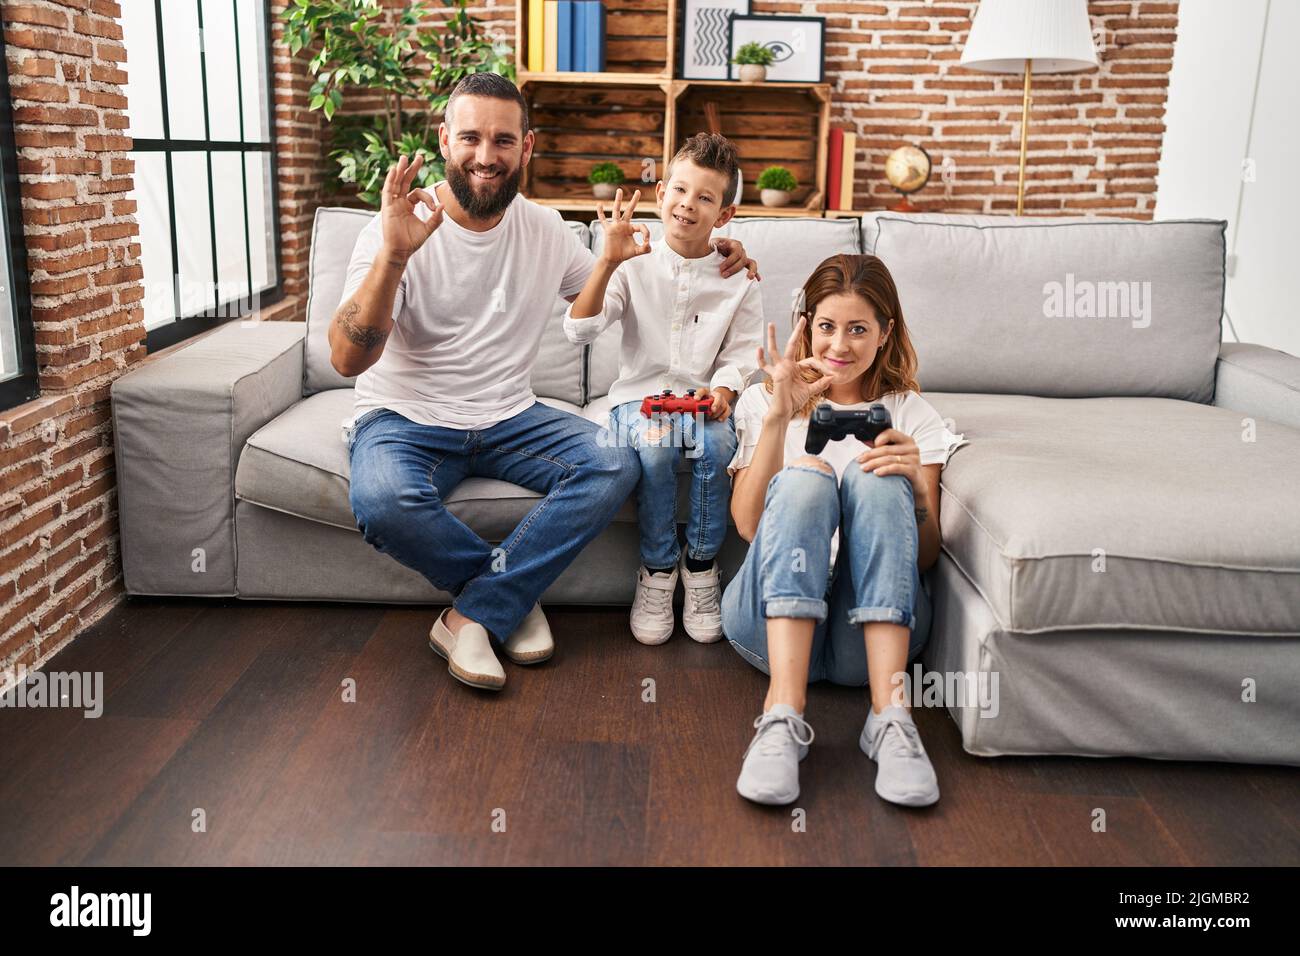 Family of three playing video game sitting on the sofa doing ok sign with fingers, smiling friendly gesturing excellent symbol Stock Photo